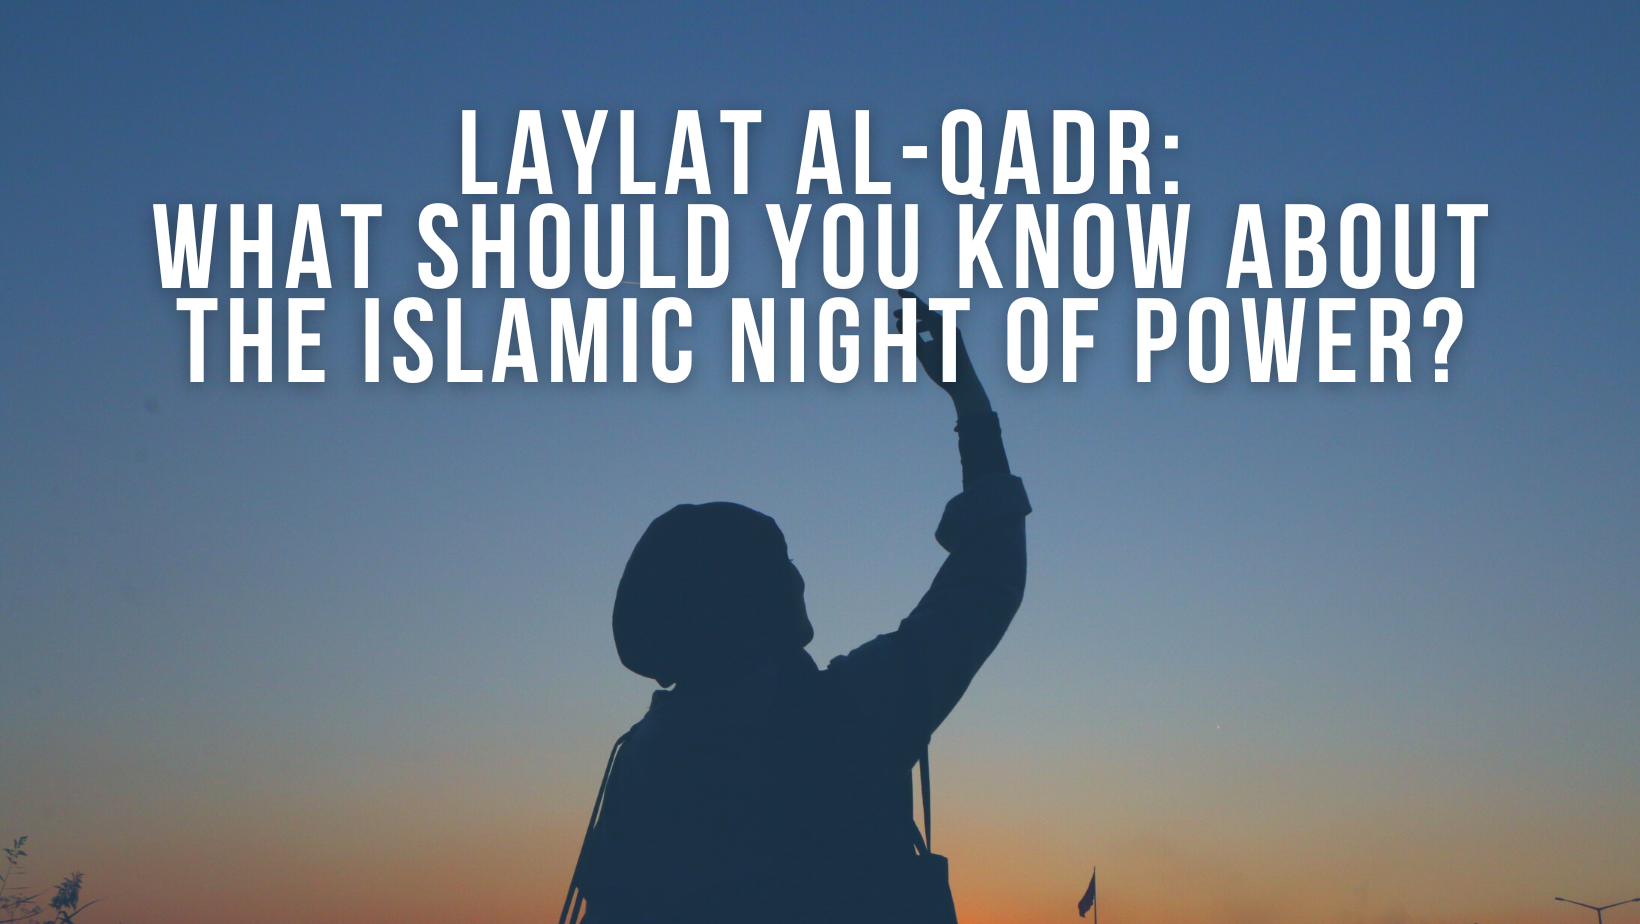 Laylat al-Qadr: What should you know about the Islamic Night of Power?